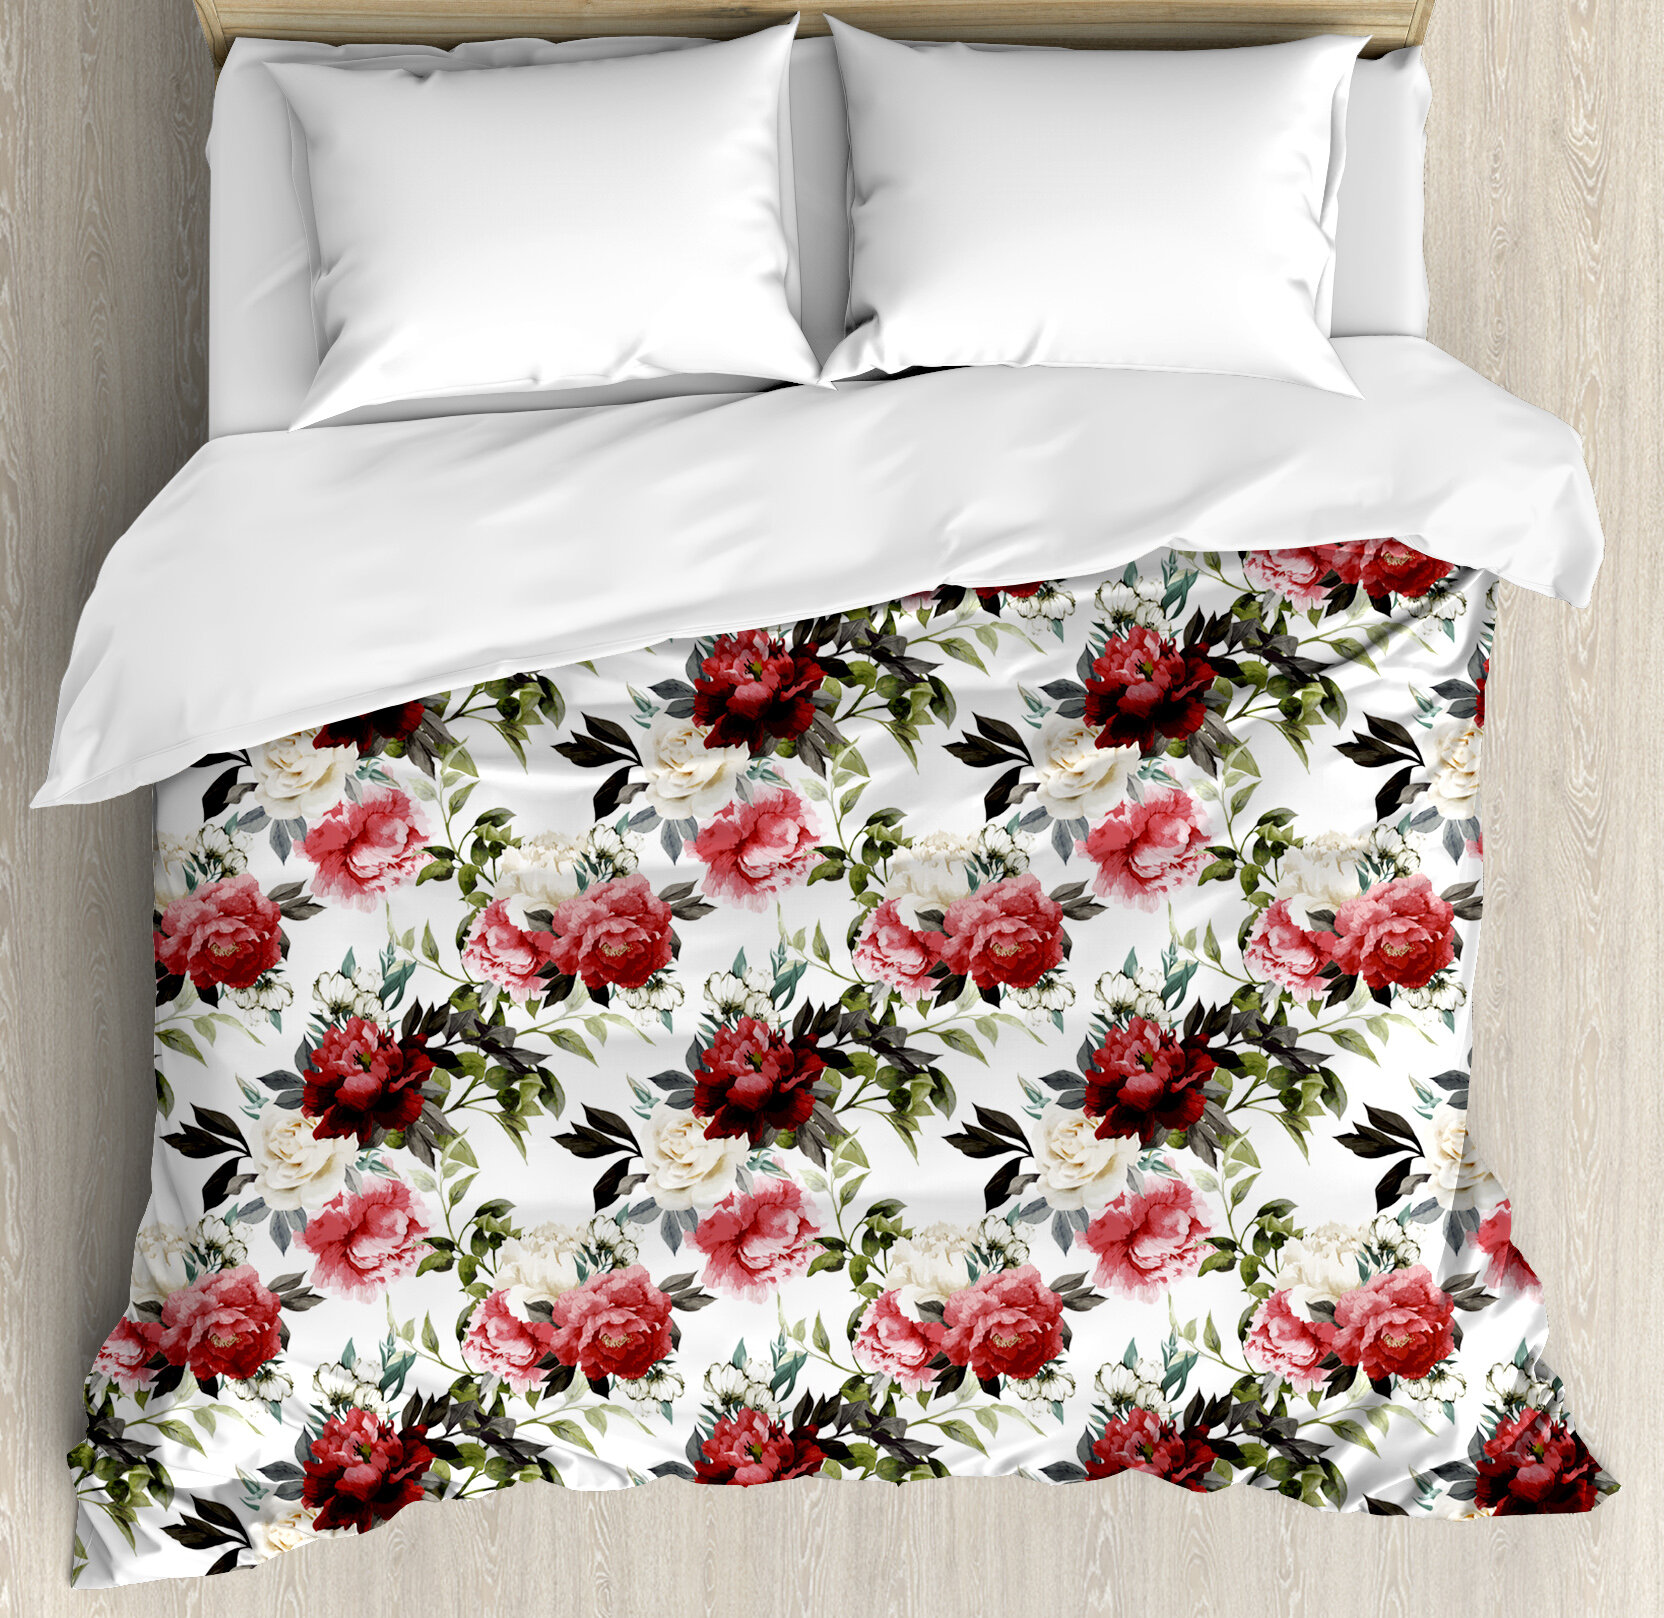 East Urban Home Shabby Elegance Country Style Floral Flower Roses